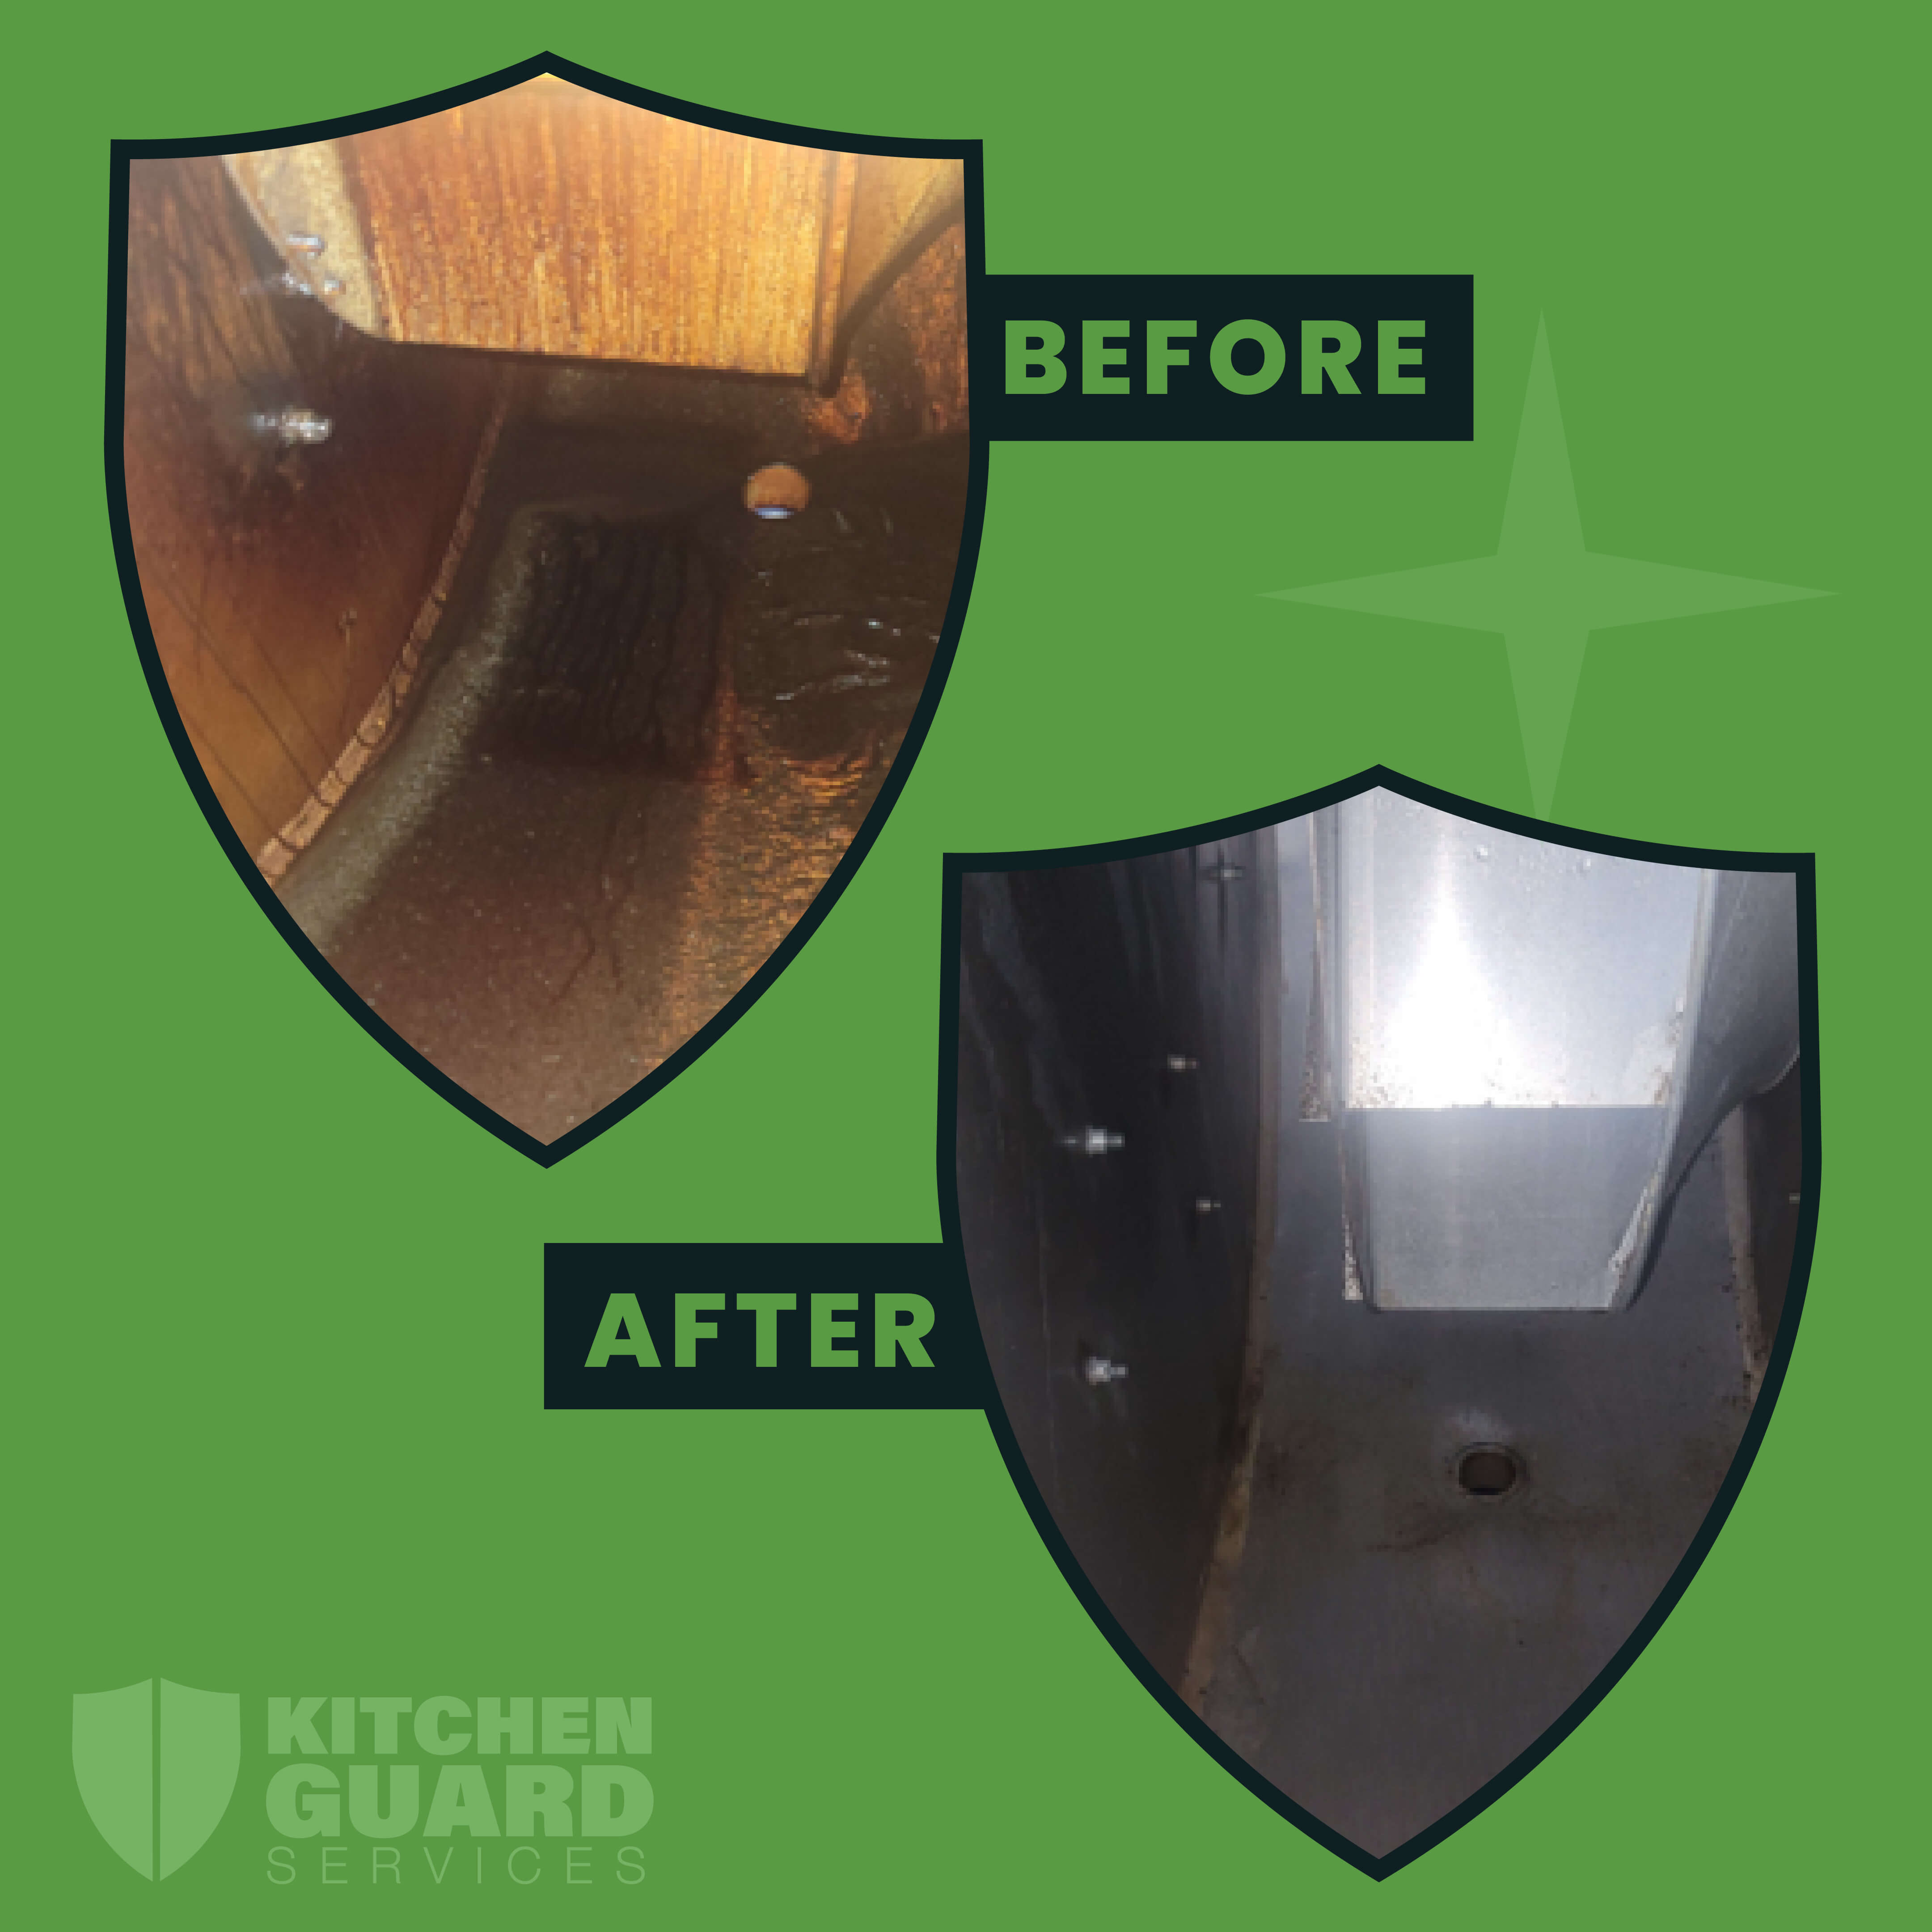 image of before and after of a dirty kitchen exhaust vs a clean kitchen exhaust on green frame